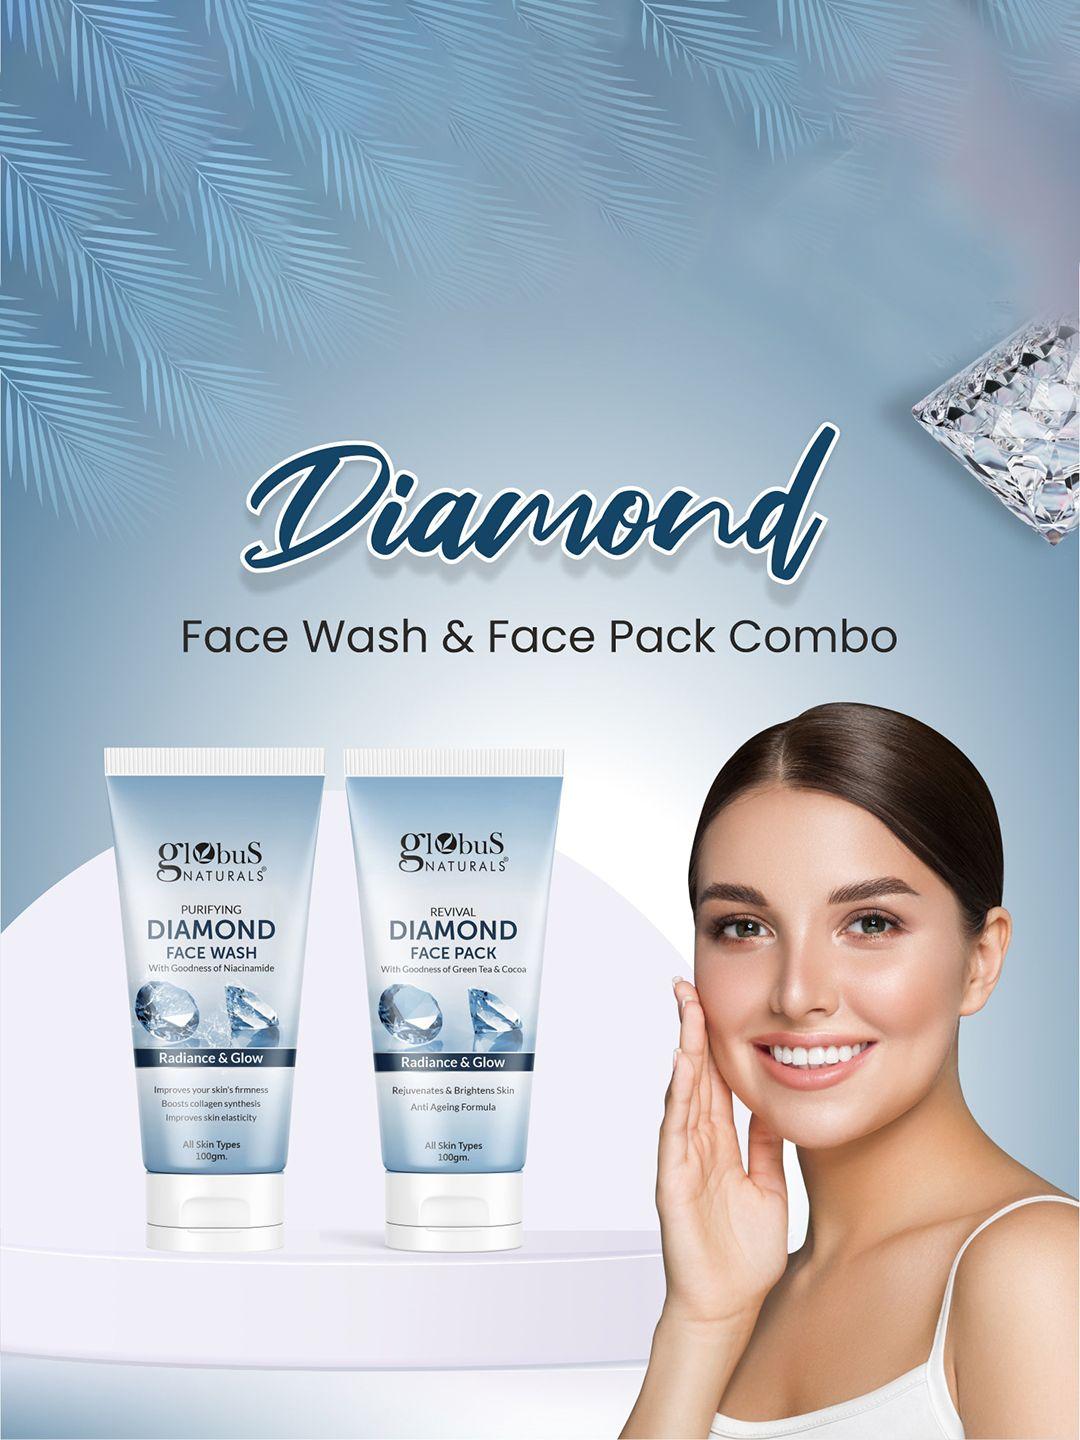 globus naturals shine boosting diamond face care combo- face wash & face pack